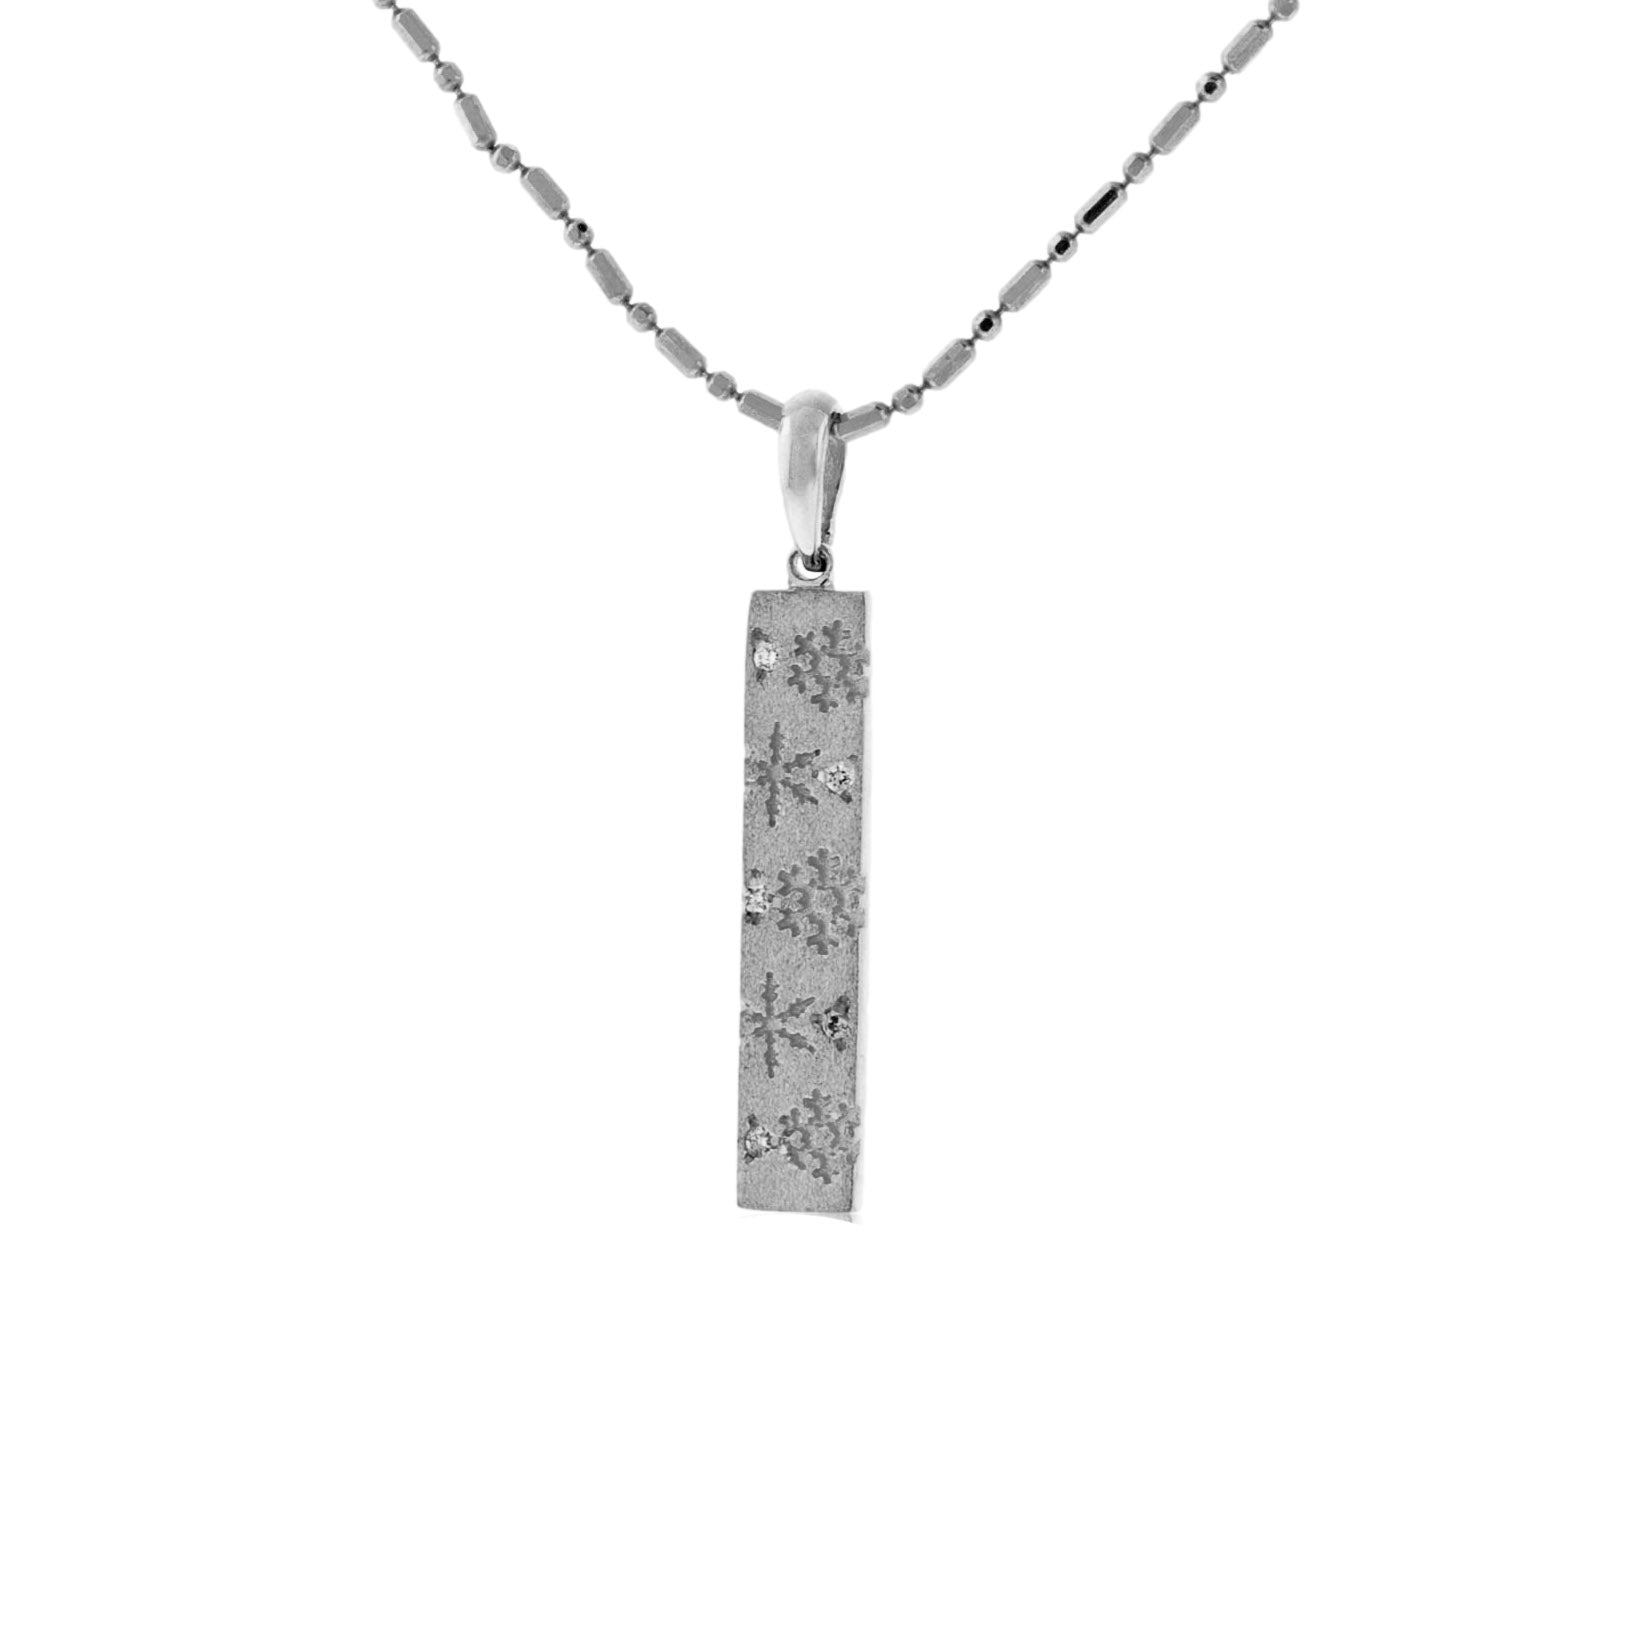 925 Sterling Silver Vertical Diamond Bar Matchstick Bar Pendant Necklace  Mens Box Chain Jewelry GN13 Top Sale Wholesale From Meilong08, $20.77 |  DHgate.Com